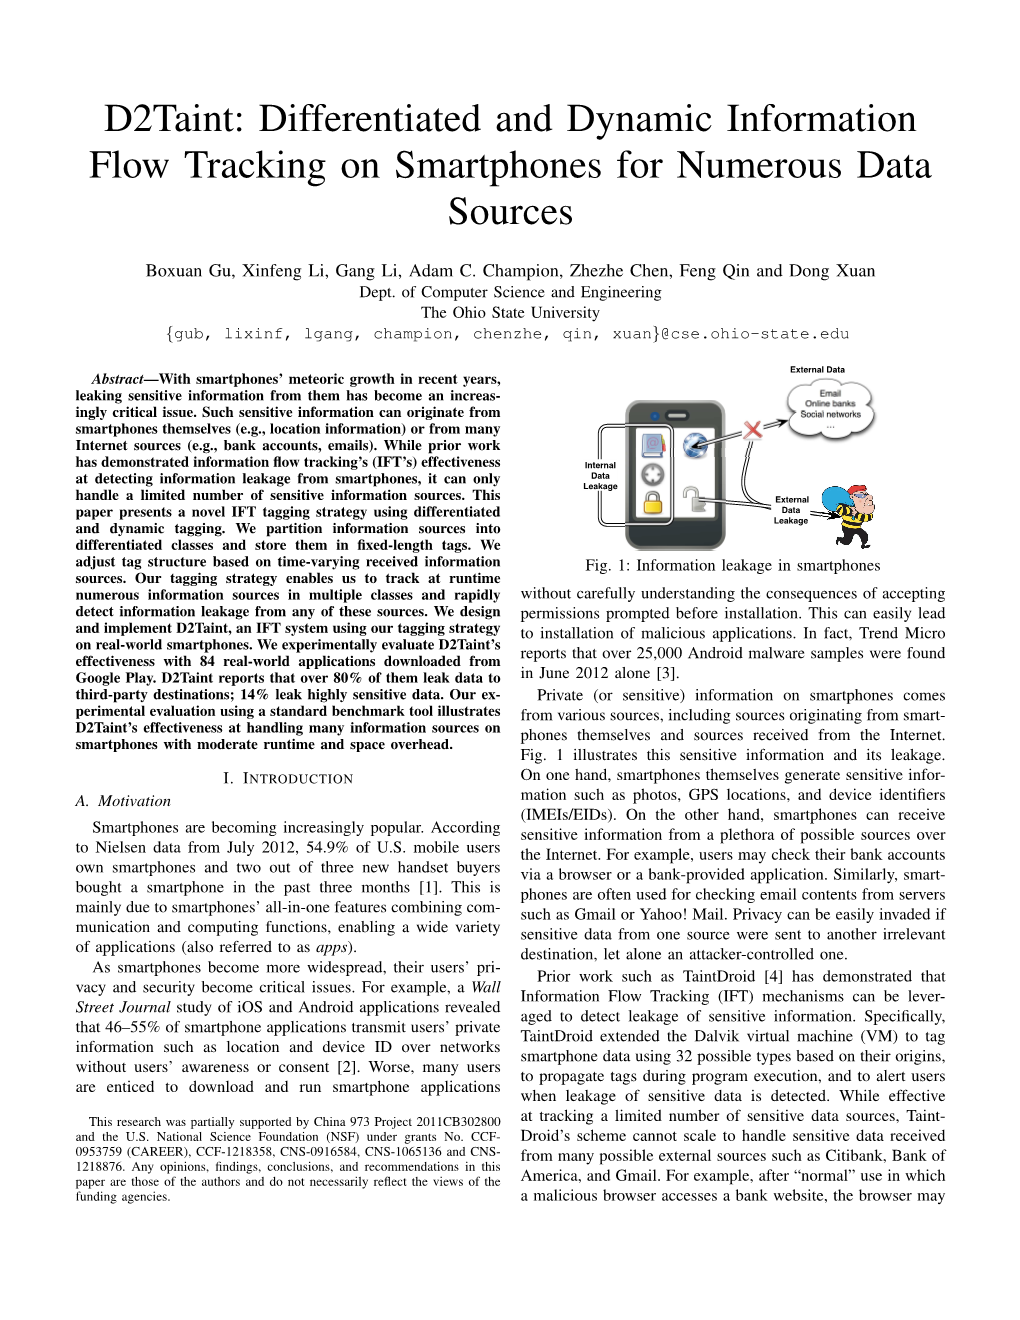 D2taint: Differentiated and Dynamic Information Flow Tracking on Smartphones for Numerous Data Sources